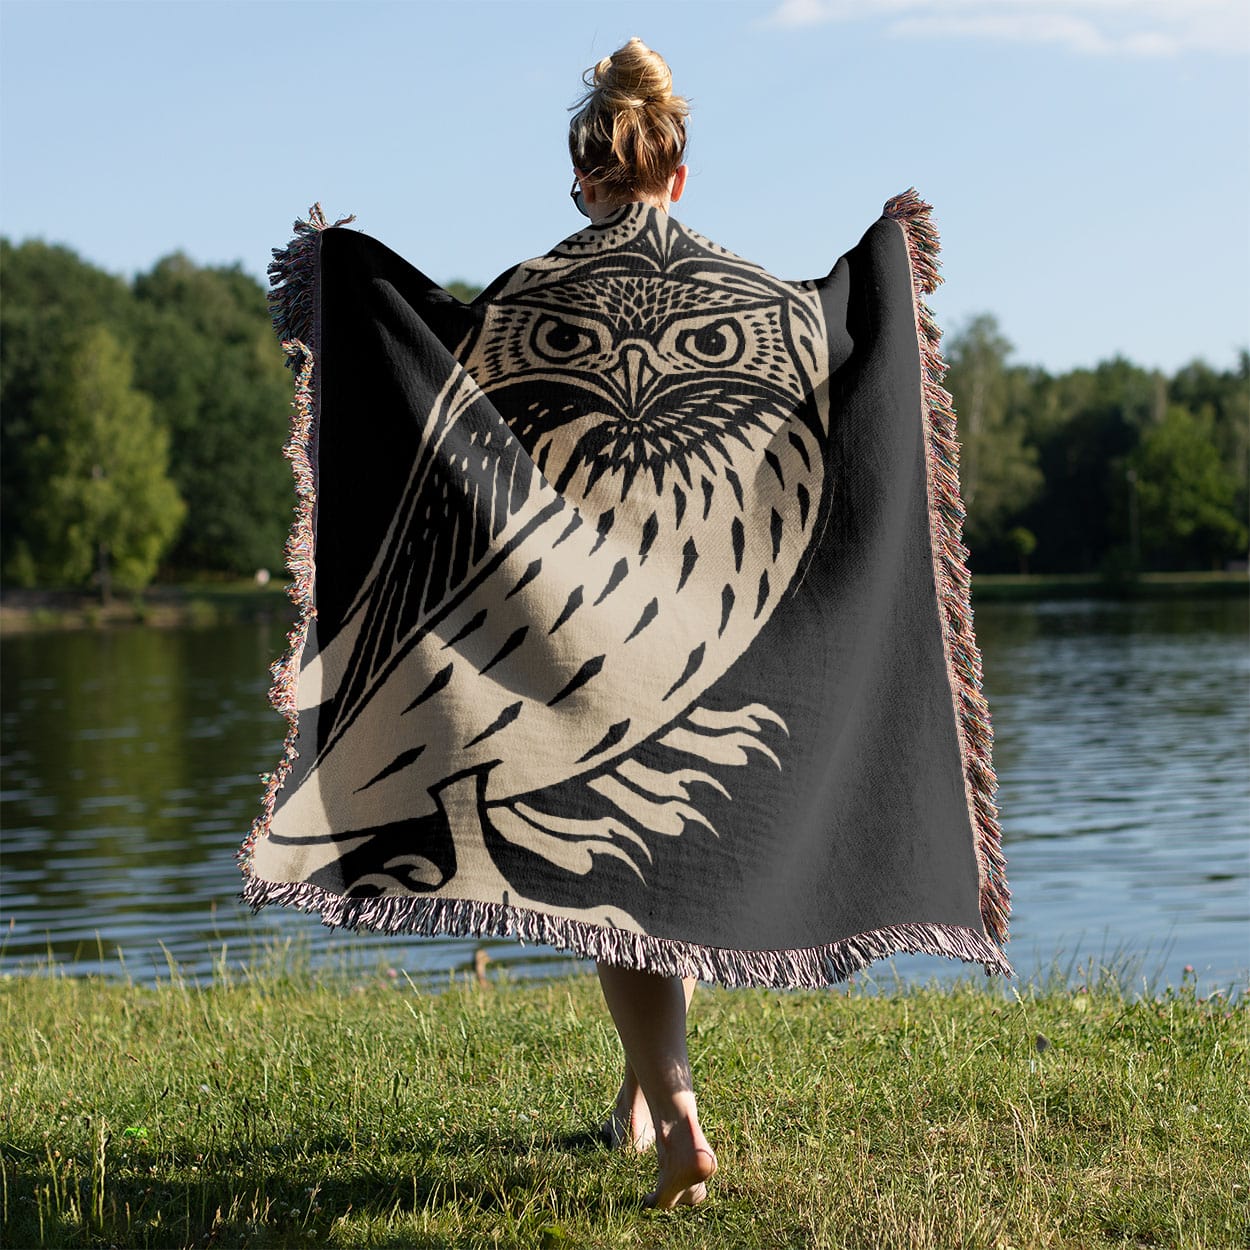 Unique Owl Woven Blanket Held on a Woman's Back Outside